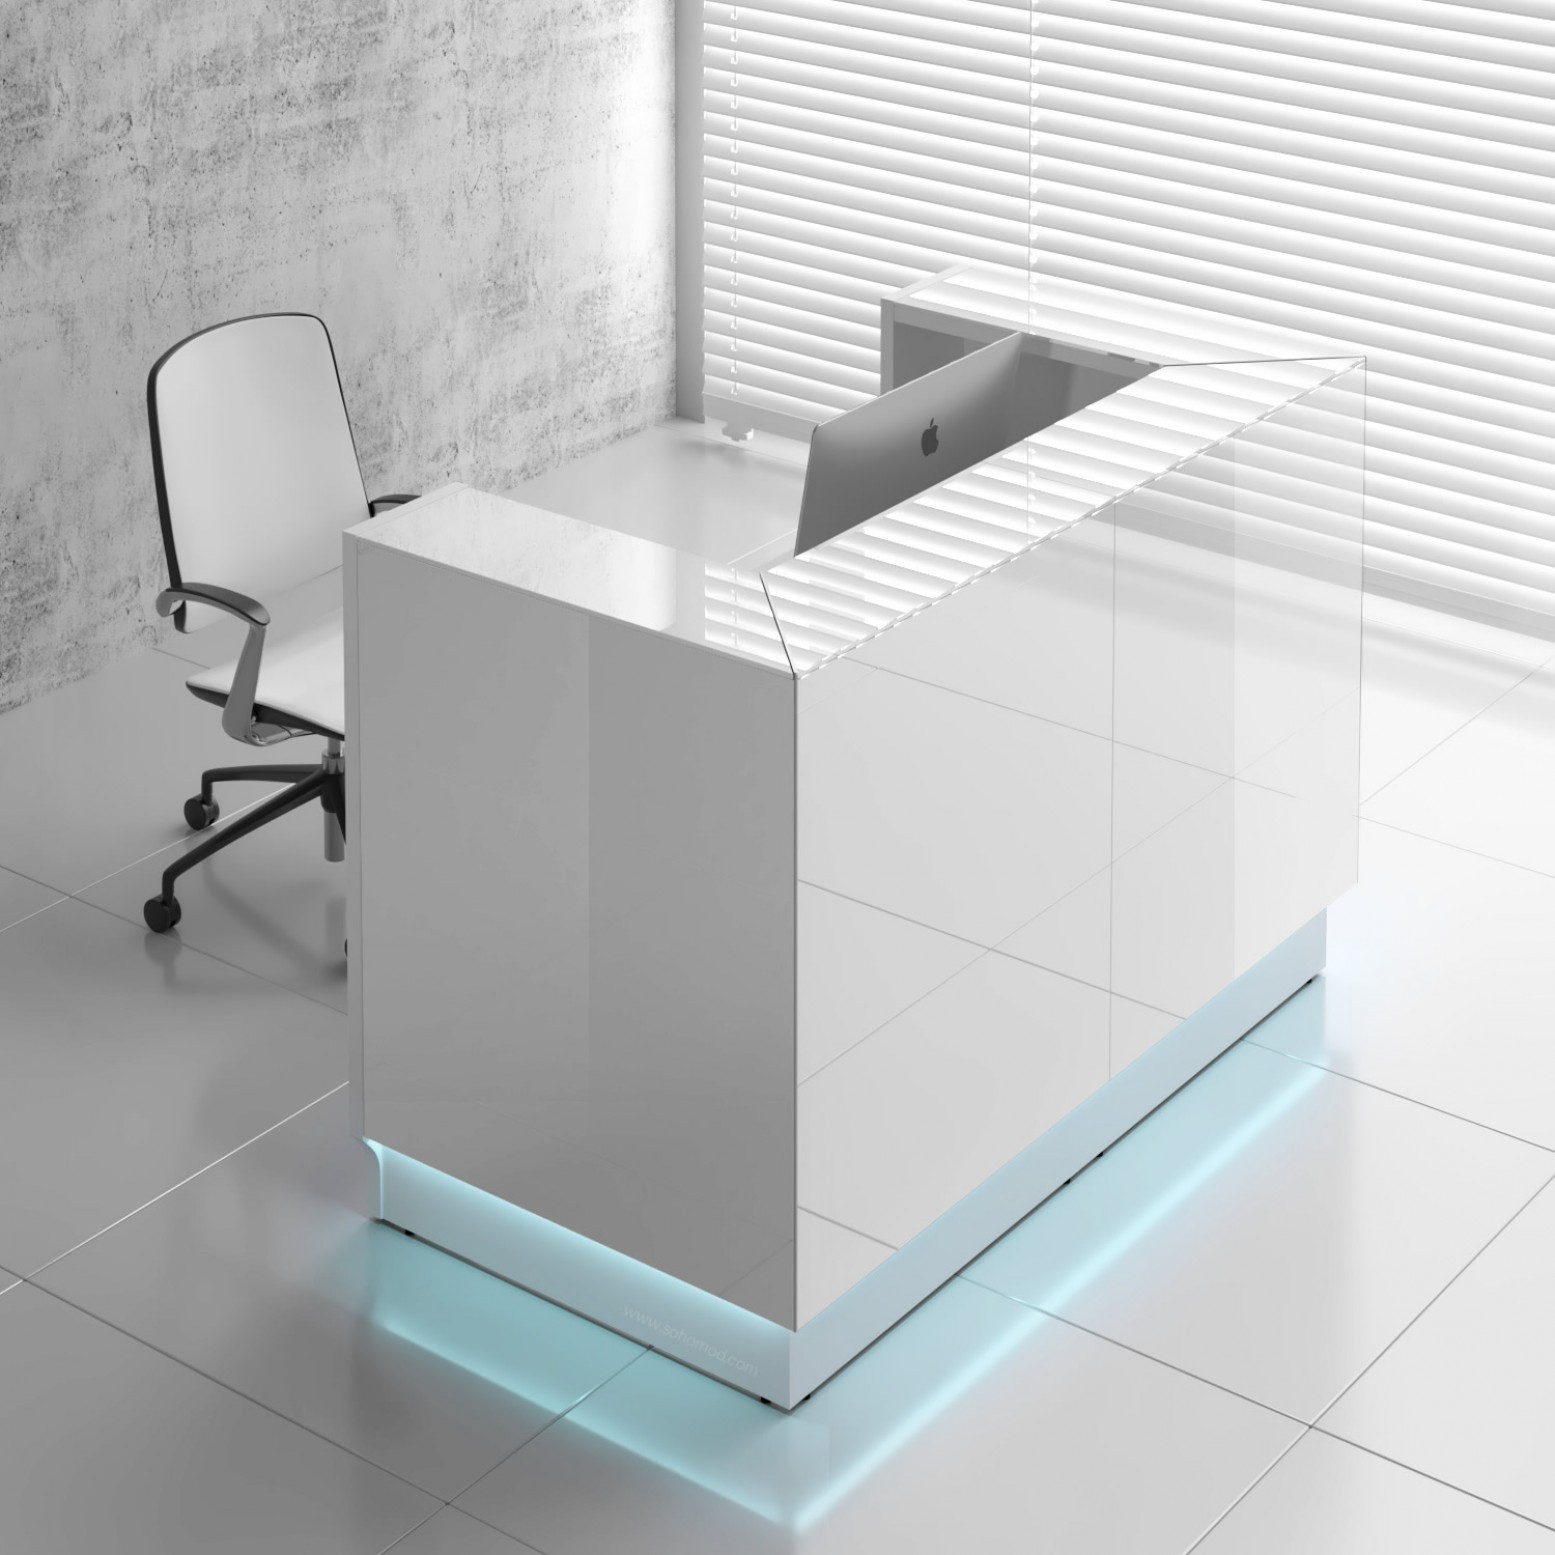 Linea lin36 reception desk white buy online at best price